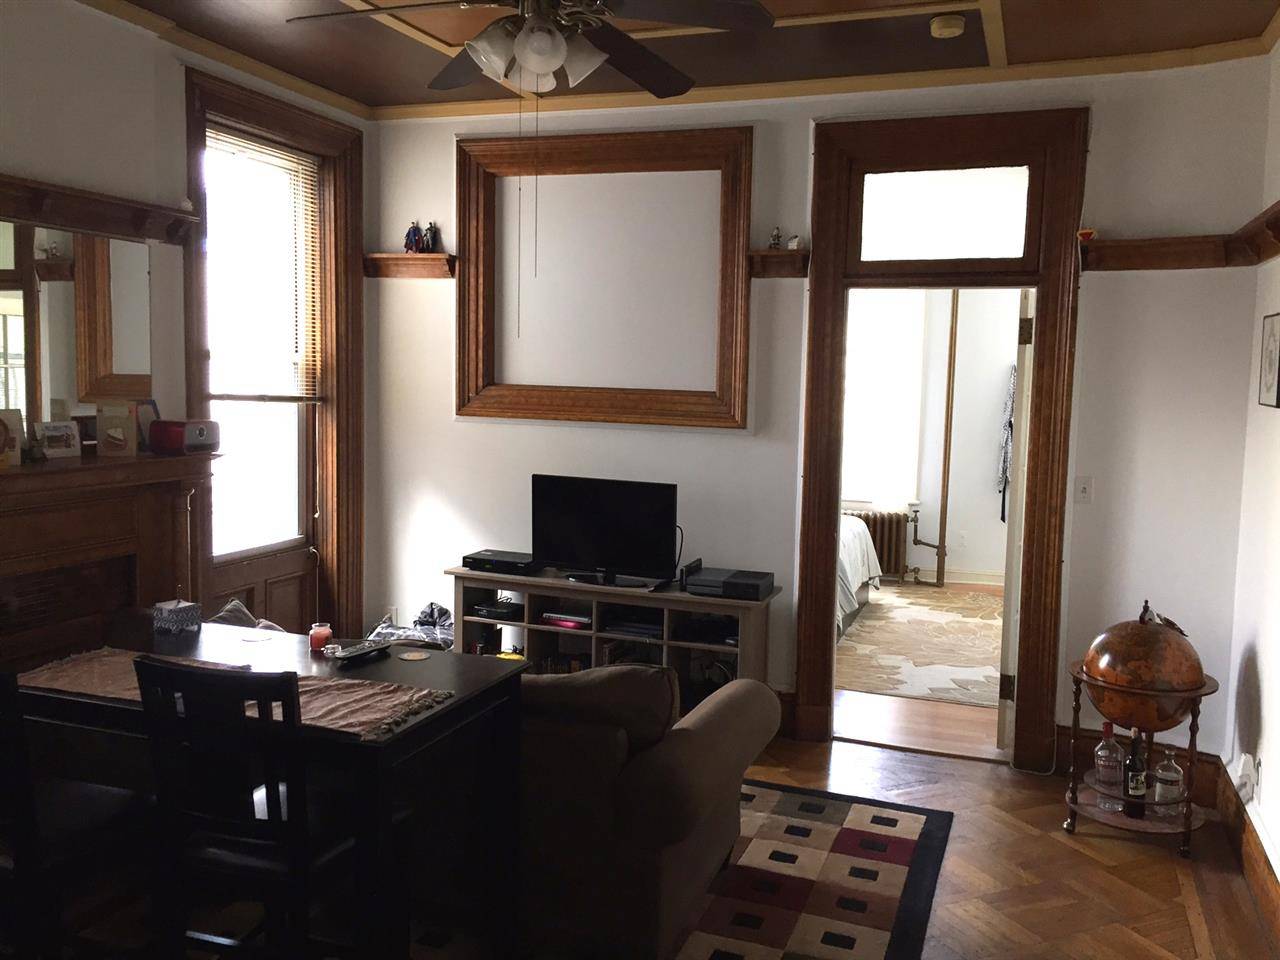 5th and Hudson Street 1 Bedroom-1 Bath in Historic Brownstone